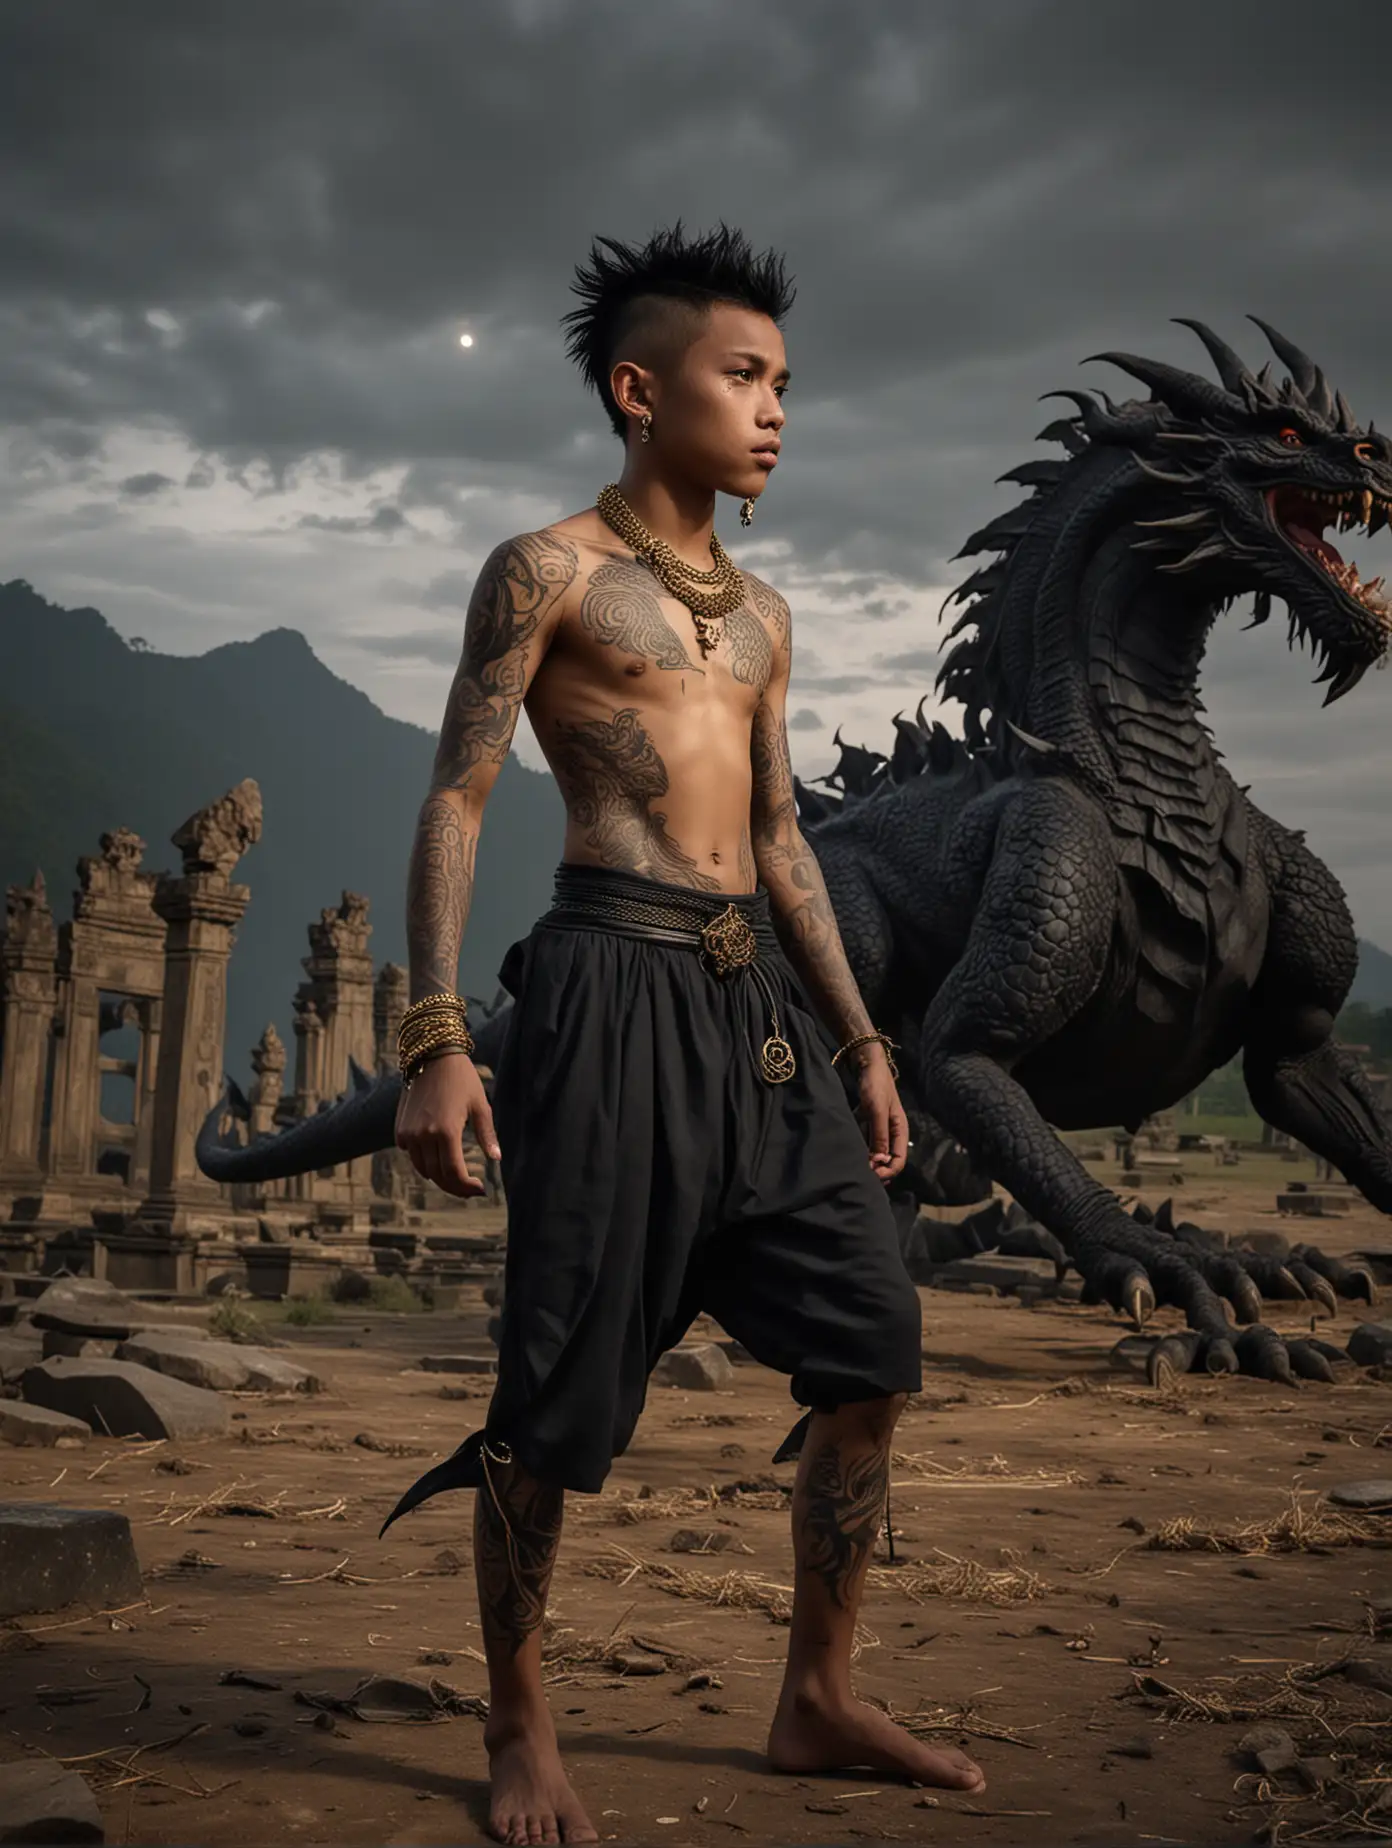 a 15 year old Indonesian boy with a bare chest, body full of tattoos, black mohawk hair, dark skin color, wearing black cloth and gold jewelry fighting with a giant black dragon in a field of temple ruins at the foot of a mountain at night